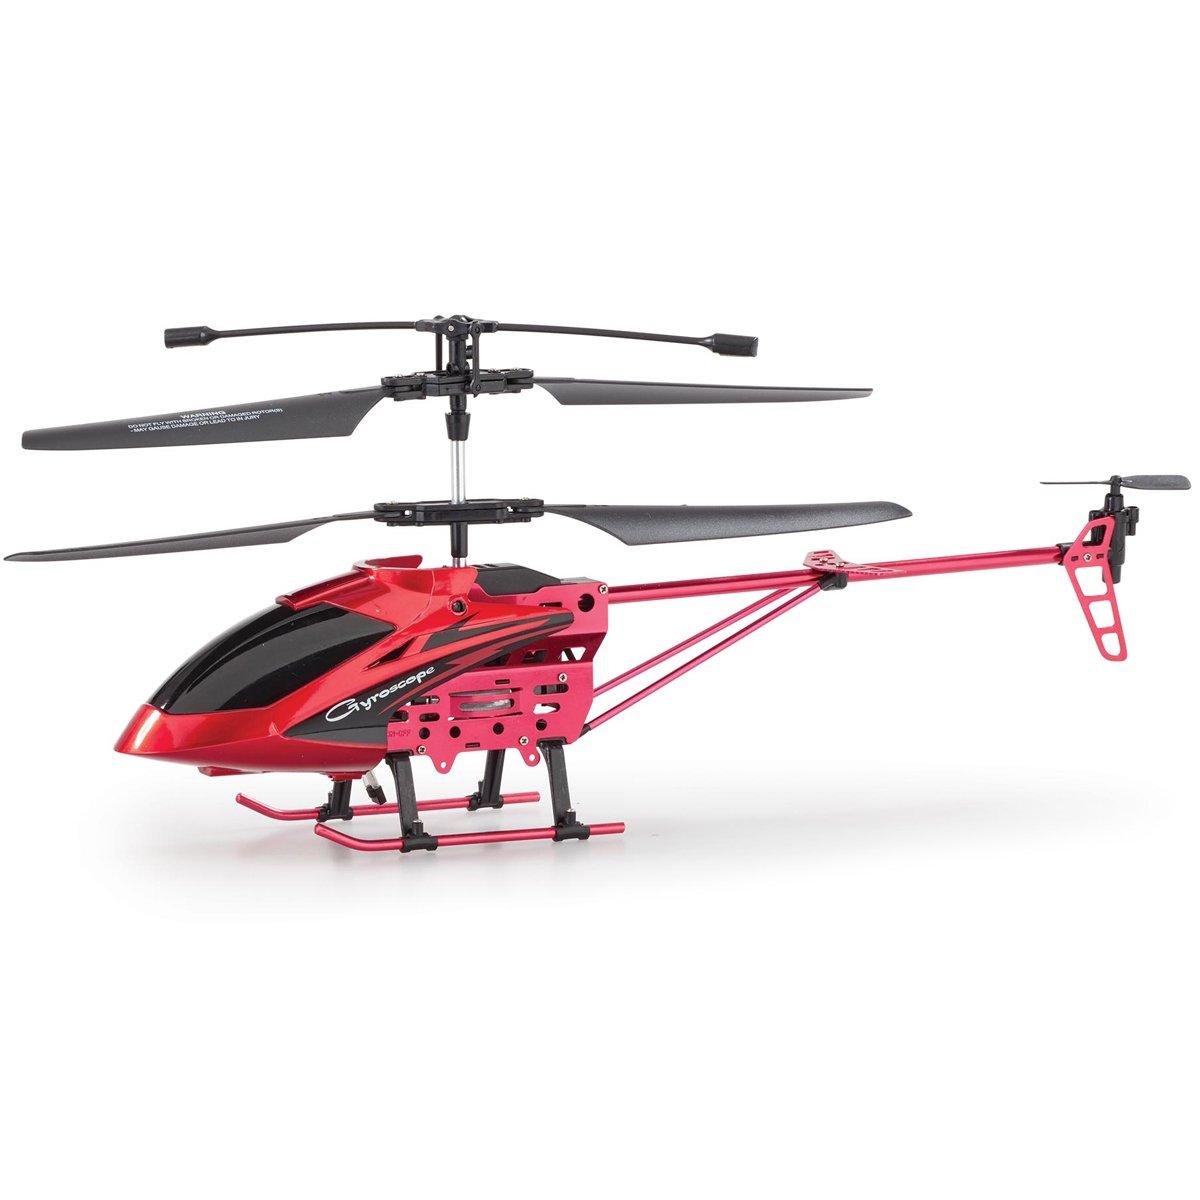 Hurricane Rc Helicopter: Finding the perfect model for your budget and needs